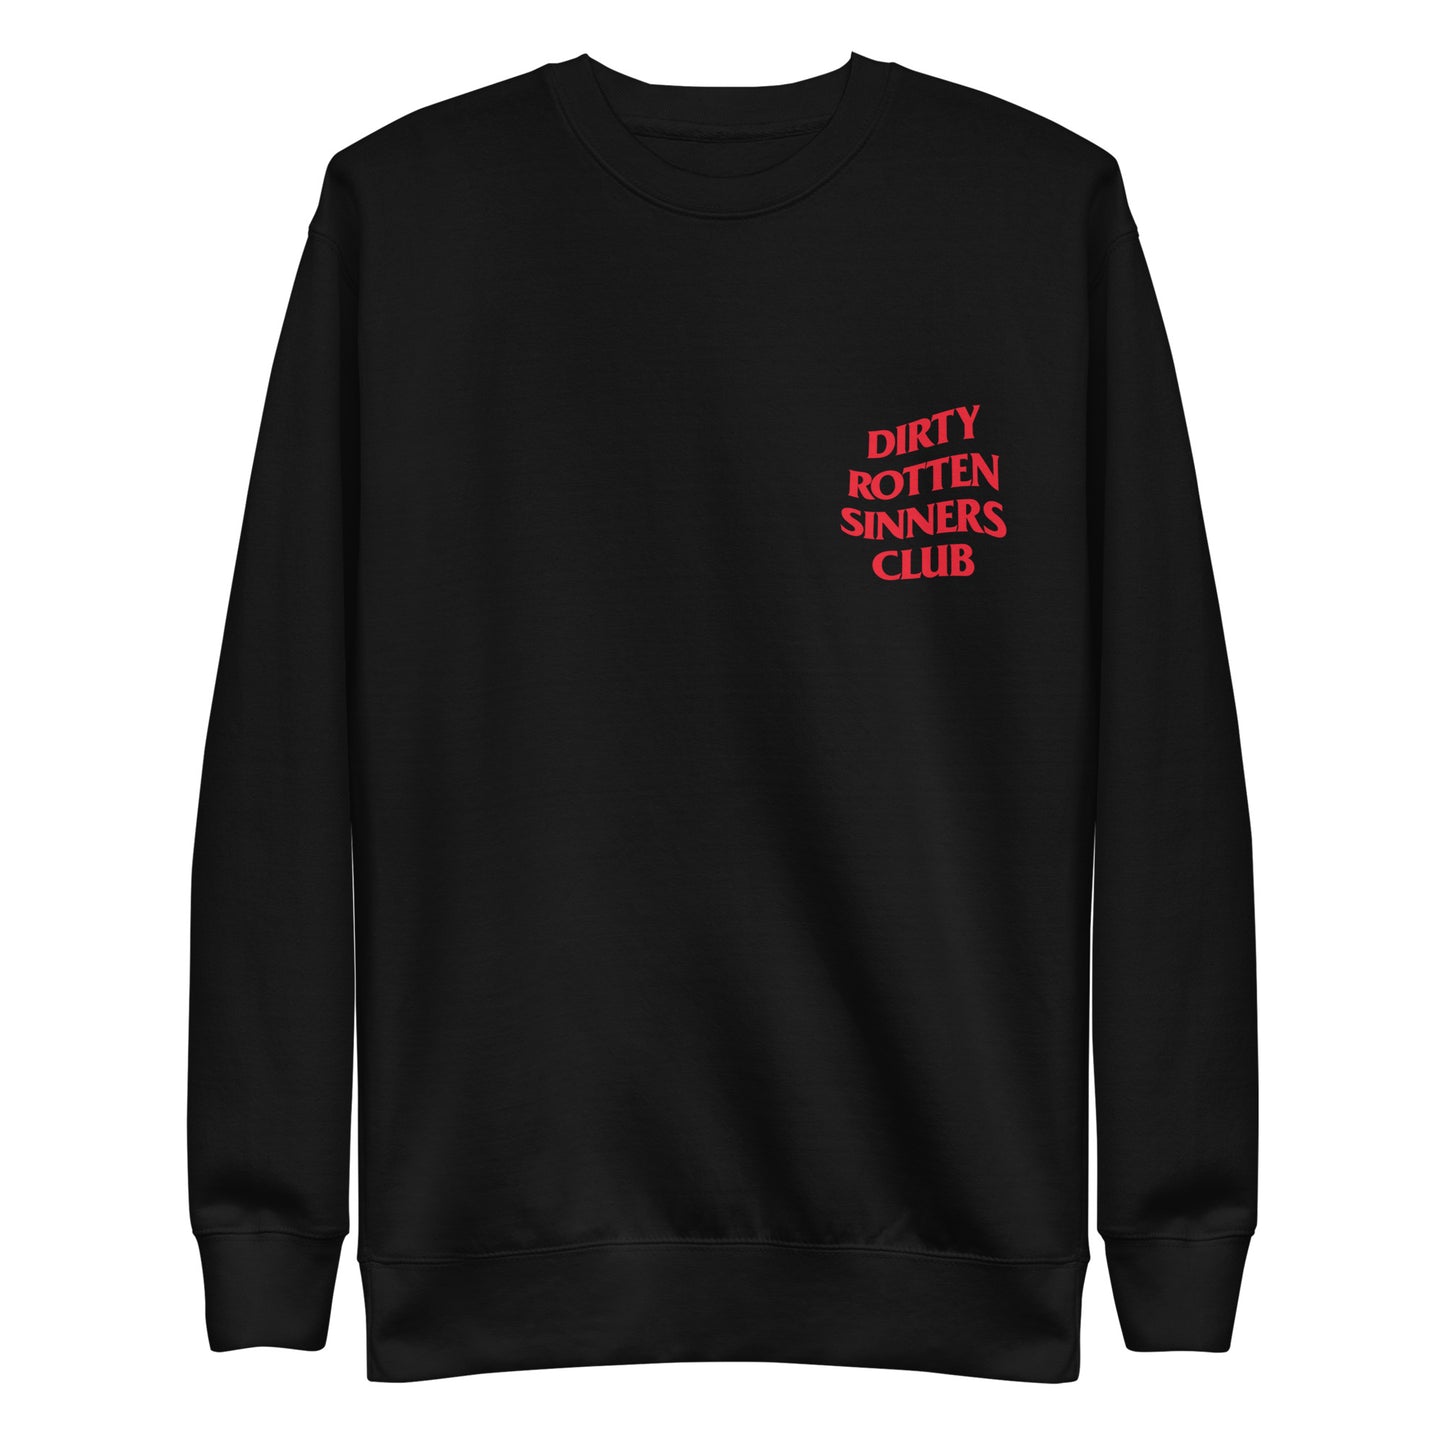 Dirty Rotten Sinners Club Sweatshirt (Blue/Black) - For Your Courage